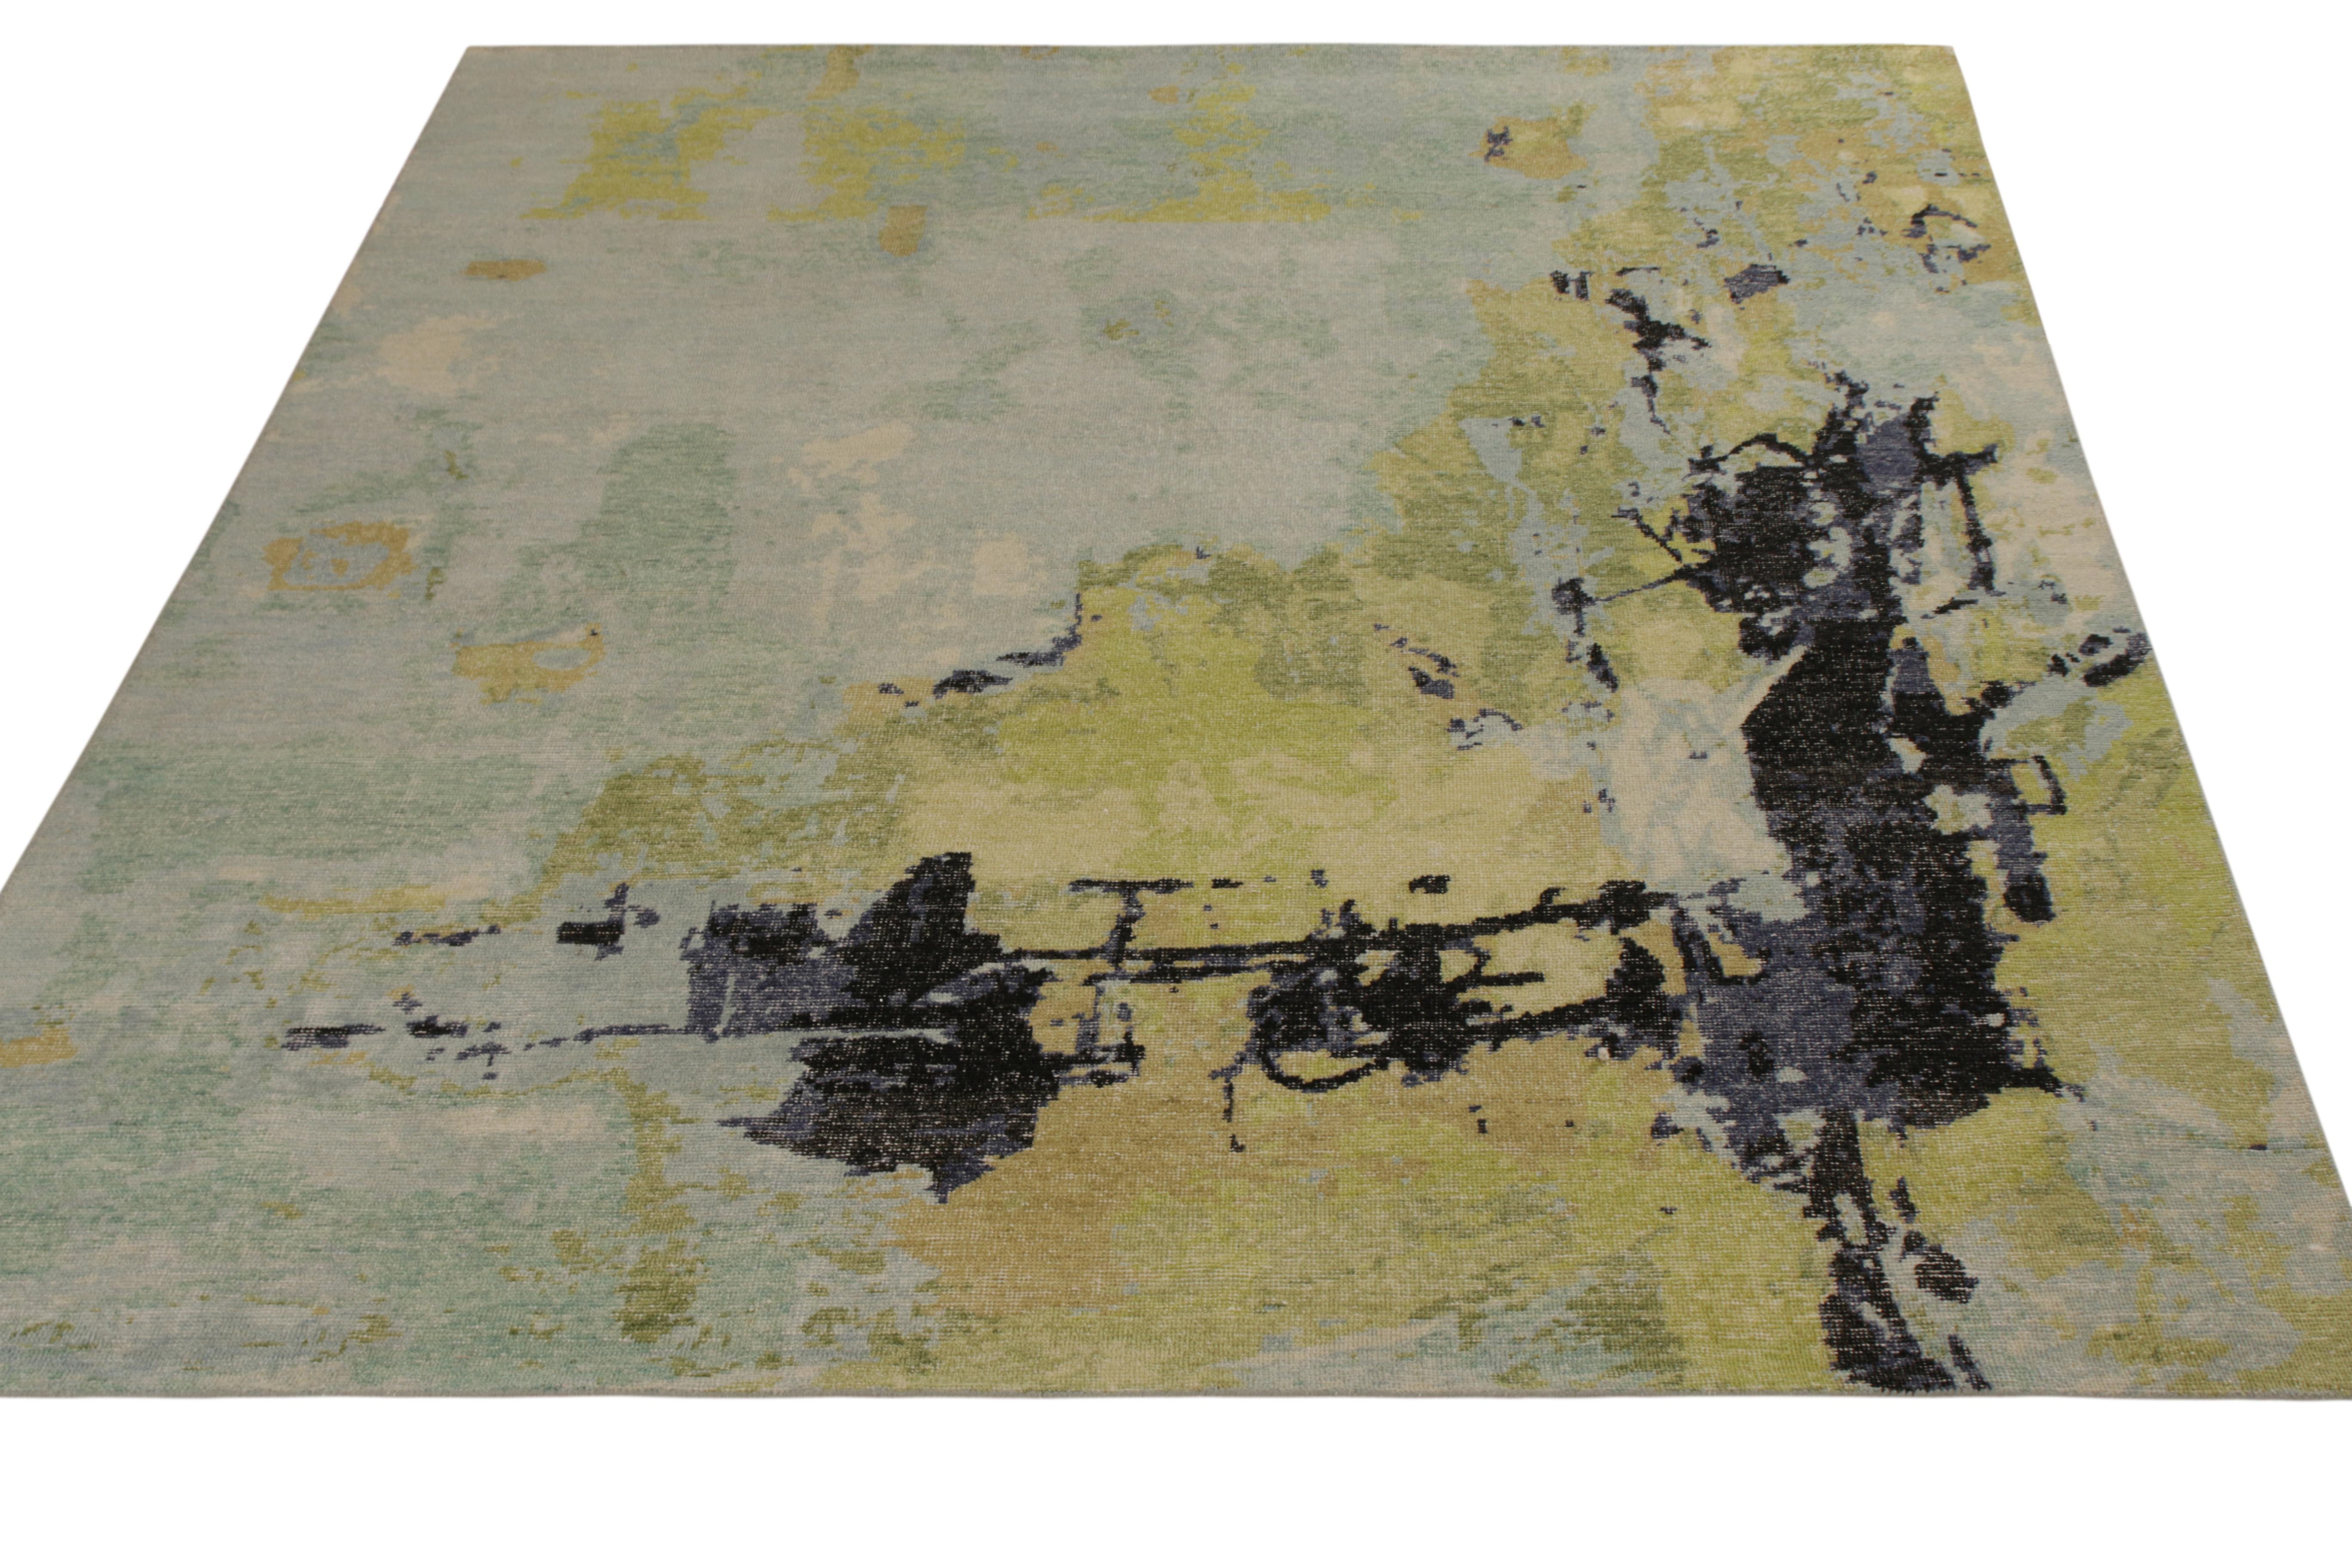 An 8x10 from the modern selections in Rug & Kilim’s Homage Collection, nodding to a meticulous abstract painterly rug style. Hand knotted wool with a shabby-chic, distressed texture playing beautifully with these dreamy hues. A distinctive green and